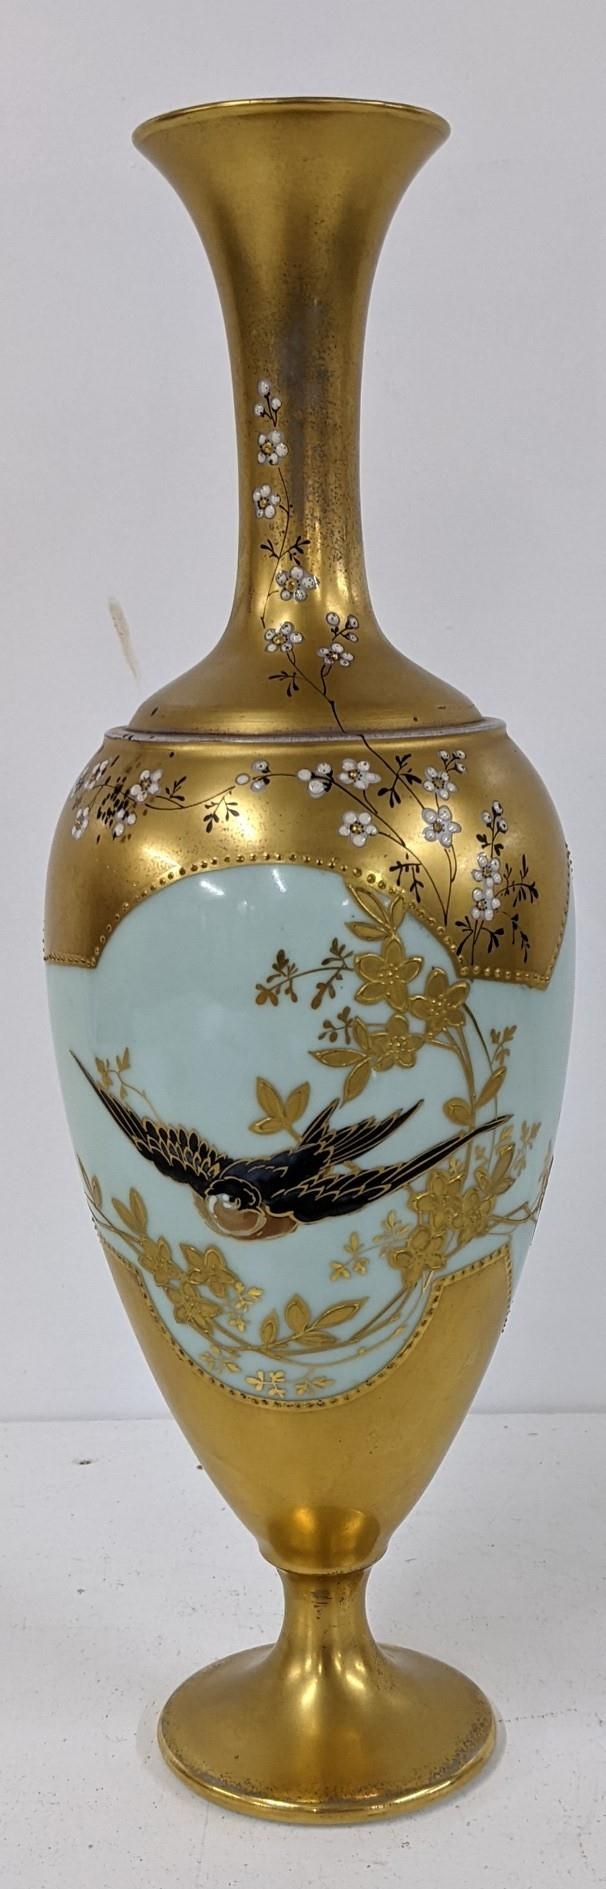 A late 19th/early 20th century Limoges porcelain vase decorated with a bird Location: If there is no